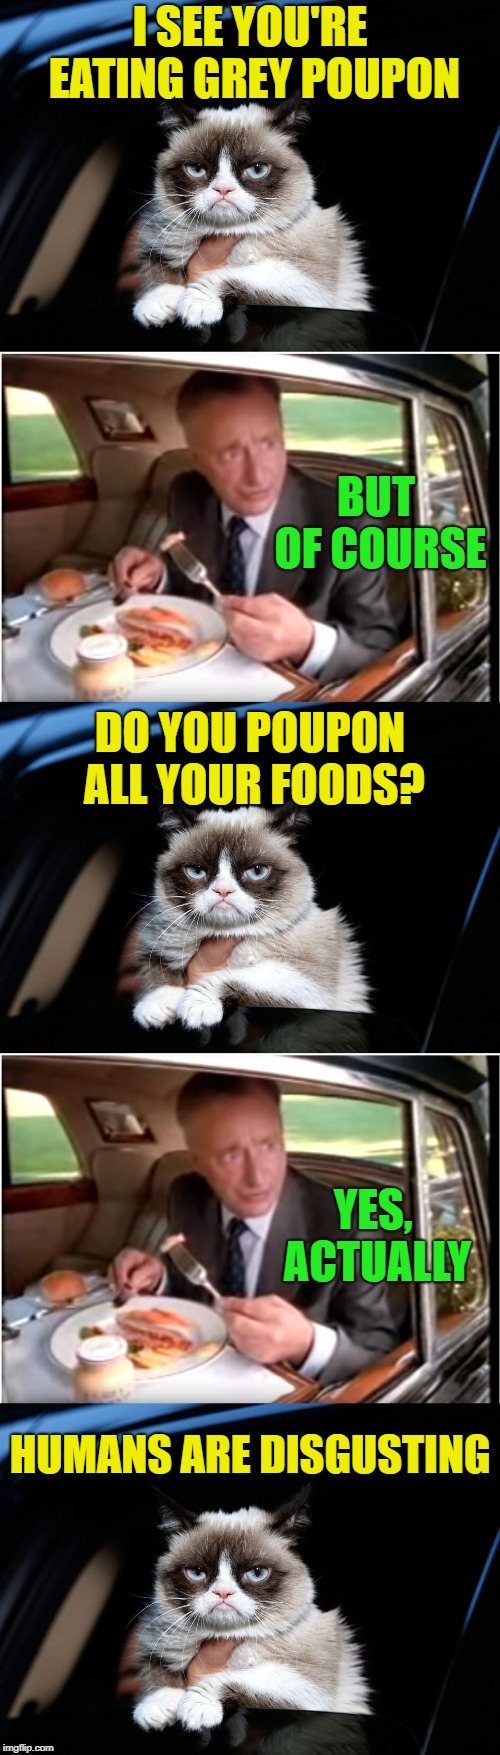 Pardon me... | I SEE YOU'RE EATING GREY POUPON; BUT OF COURSE; DO YOU POUPON ALL YOUR FOODS? YES, ACTUALLY; HUMANS ARE DISGUSTING | image tagged in memes,grumpy cat car window,grey poupon,funny | made w/ Imgflip meme maker